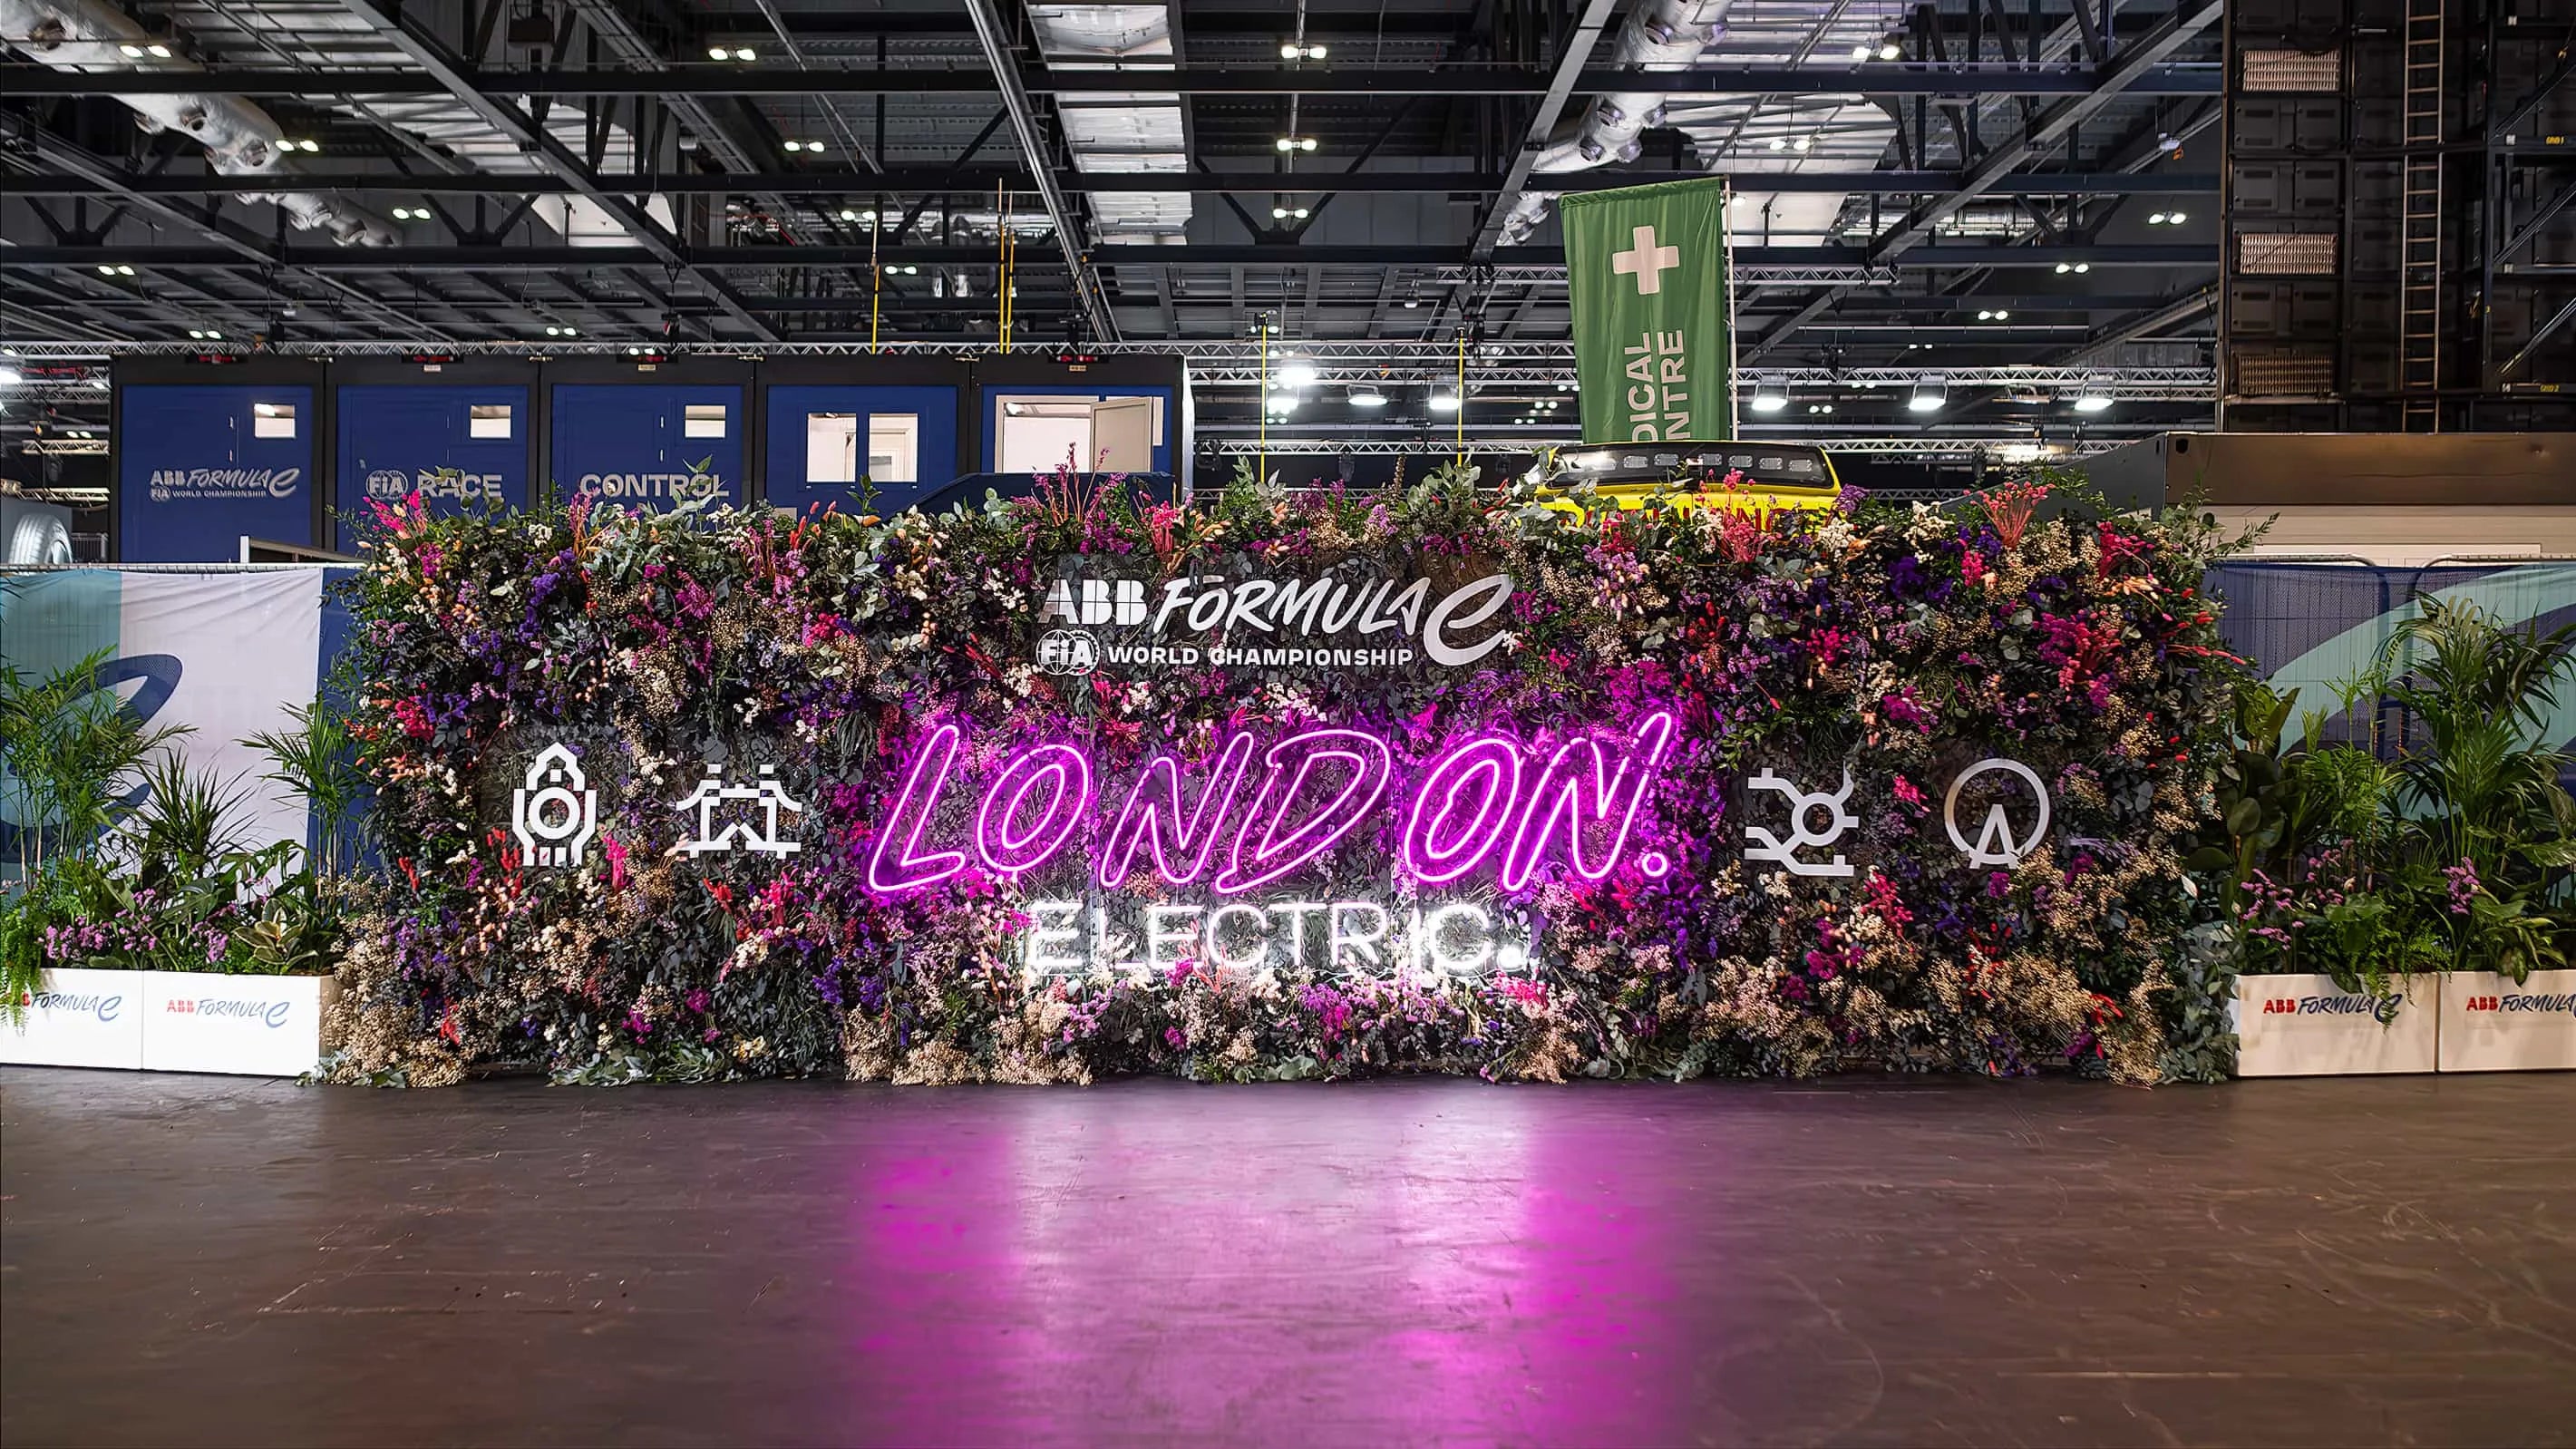 An expansive and intense floral installation at the Formula E London Electric event features a grand display of multicoloured flowers and bespoke lighting - Amaranté London.